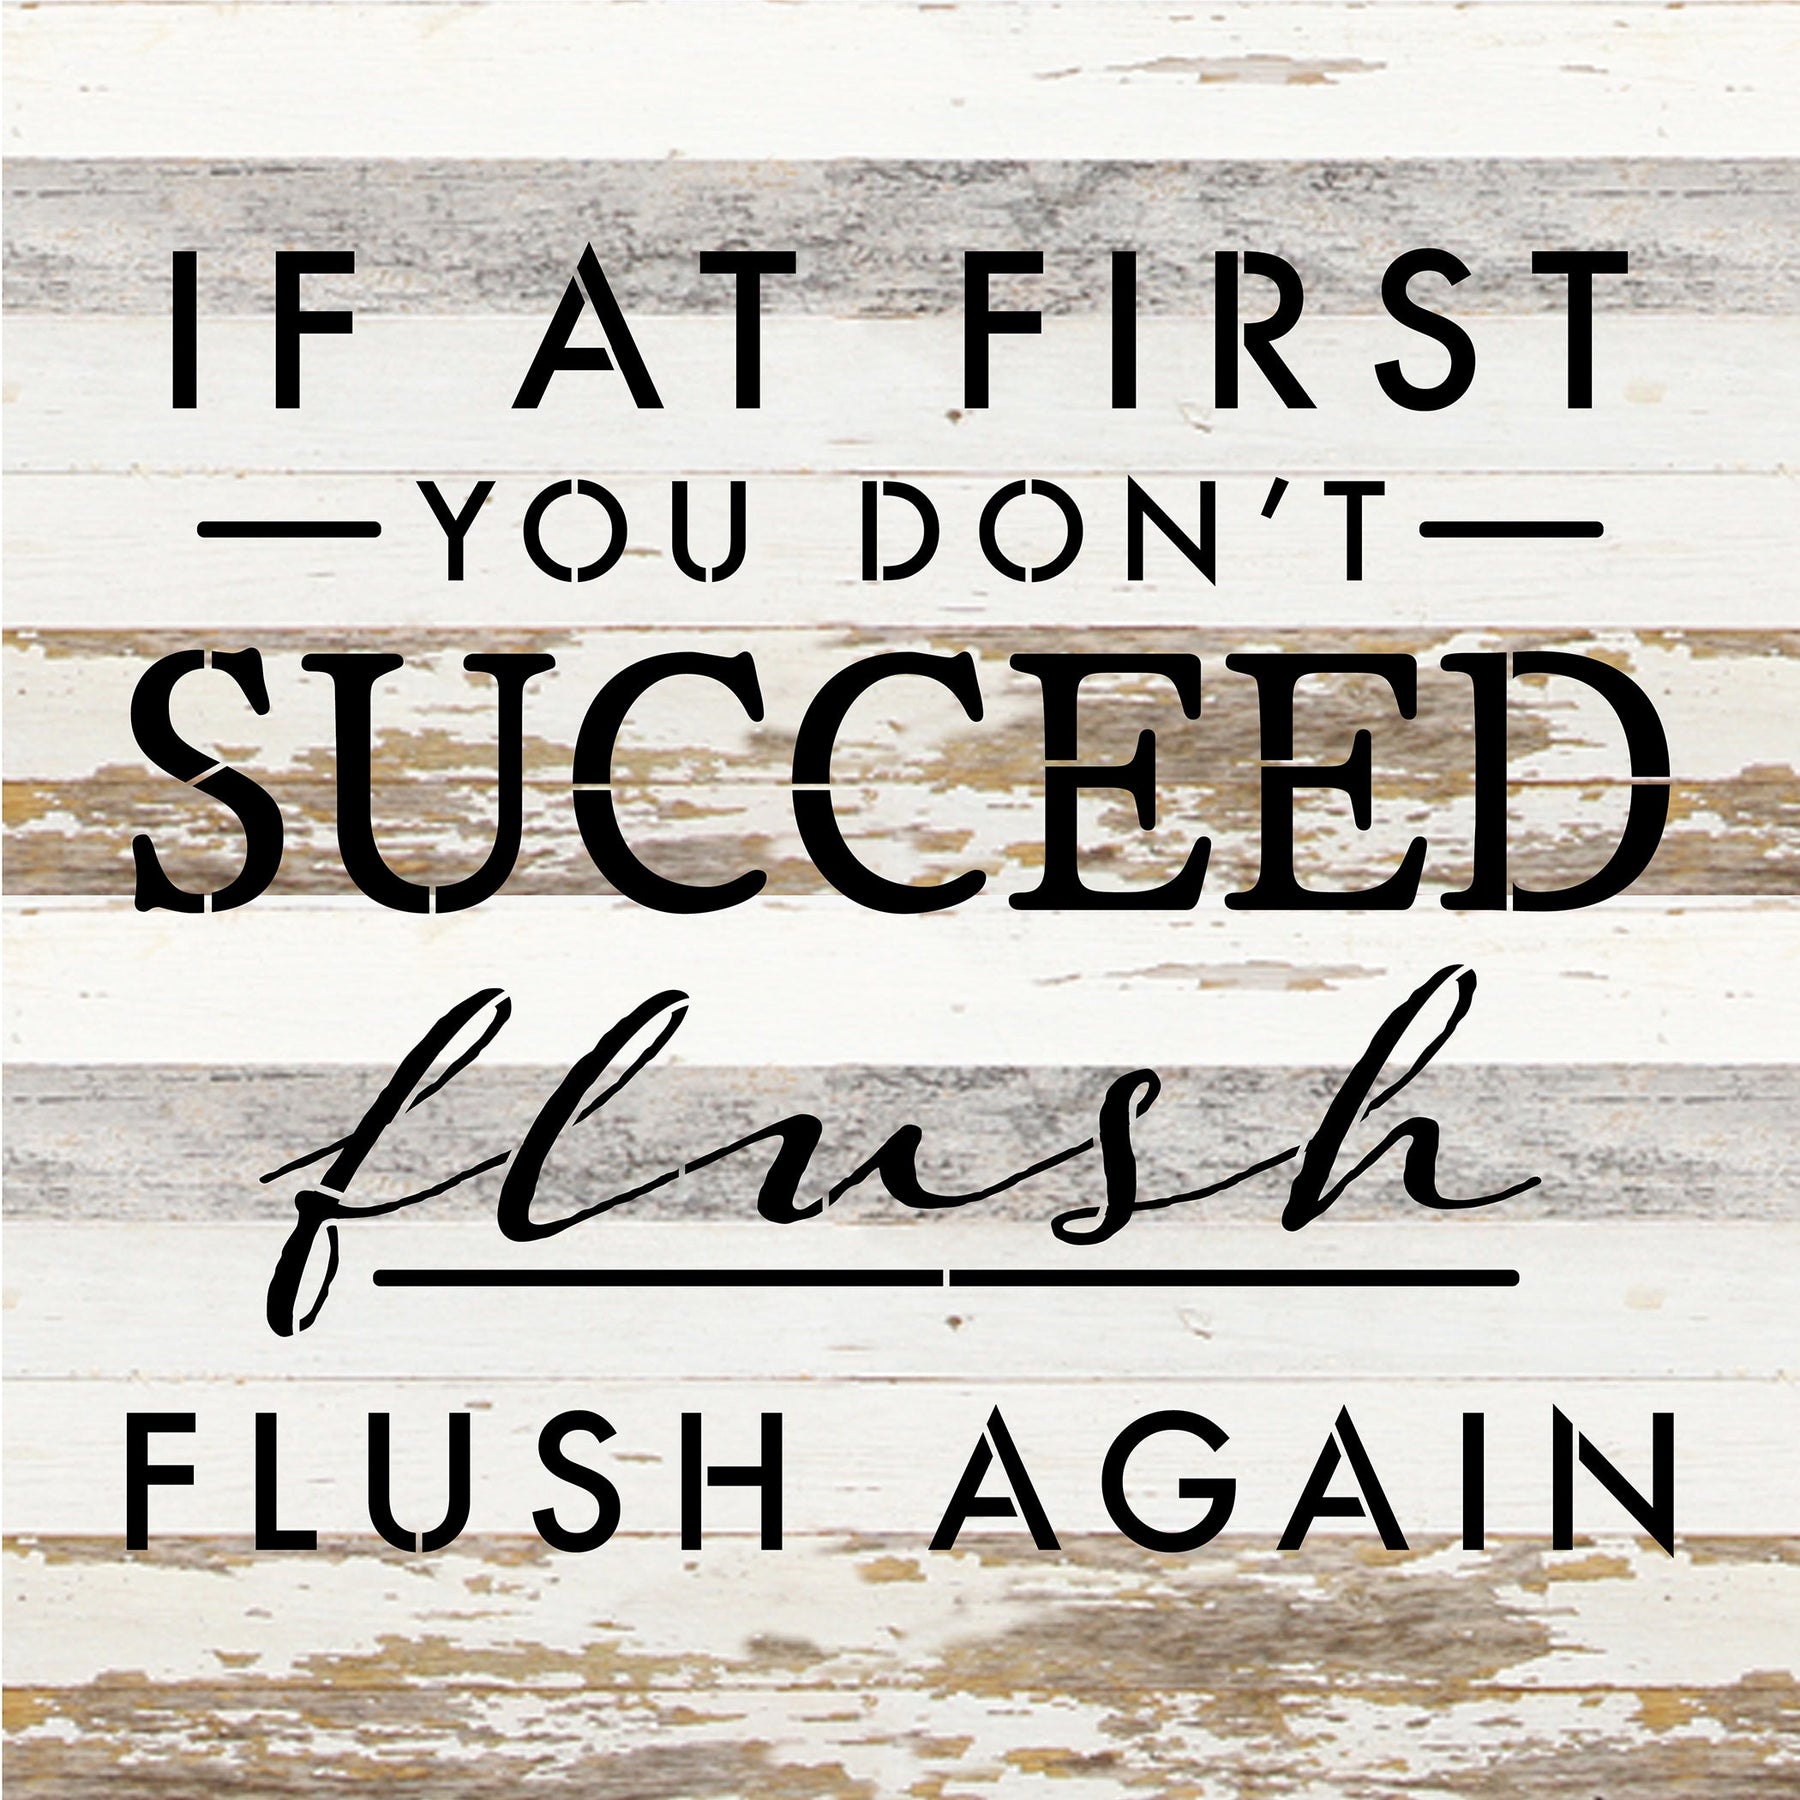 If at first you don't succeed, flush, flush again / 14x14 Reclaimed Wood Sign